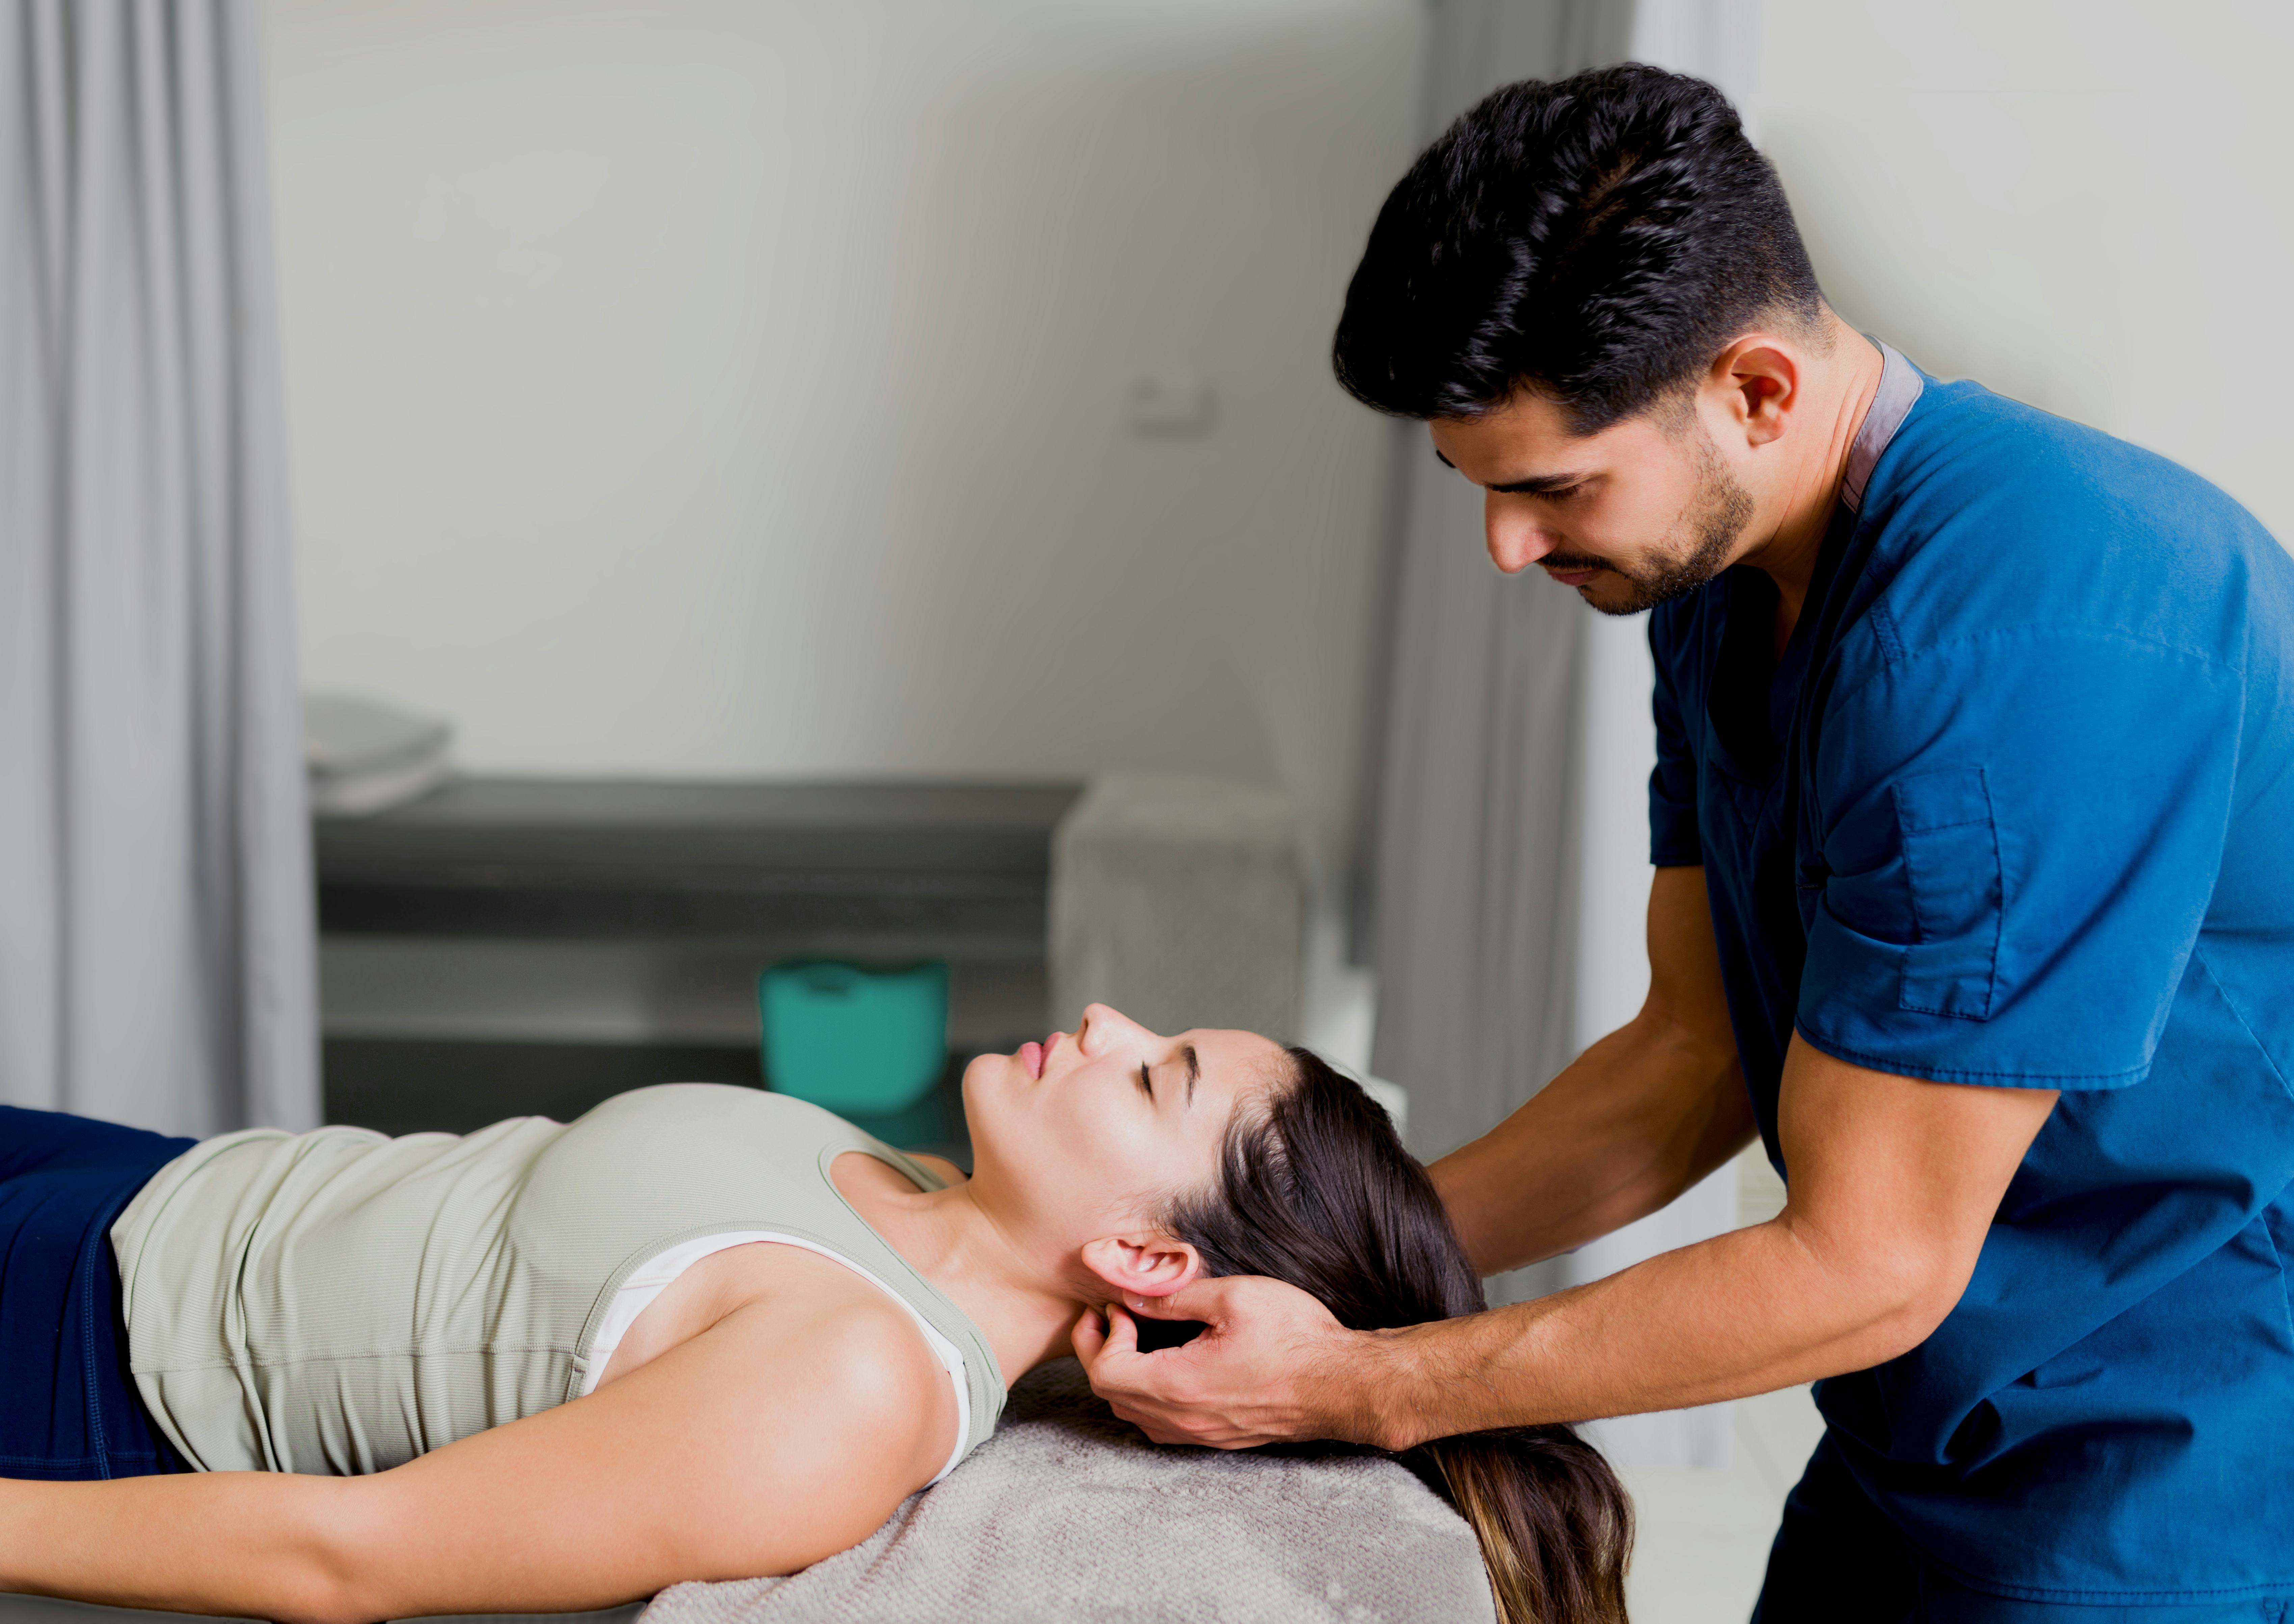 A woman is lying on her back on a massage table, receiving a neck massage from a masseur.